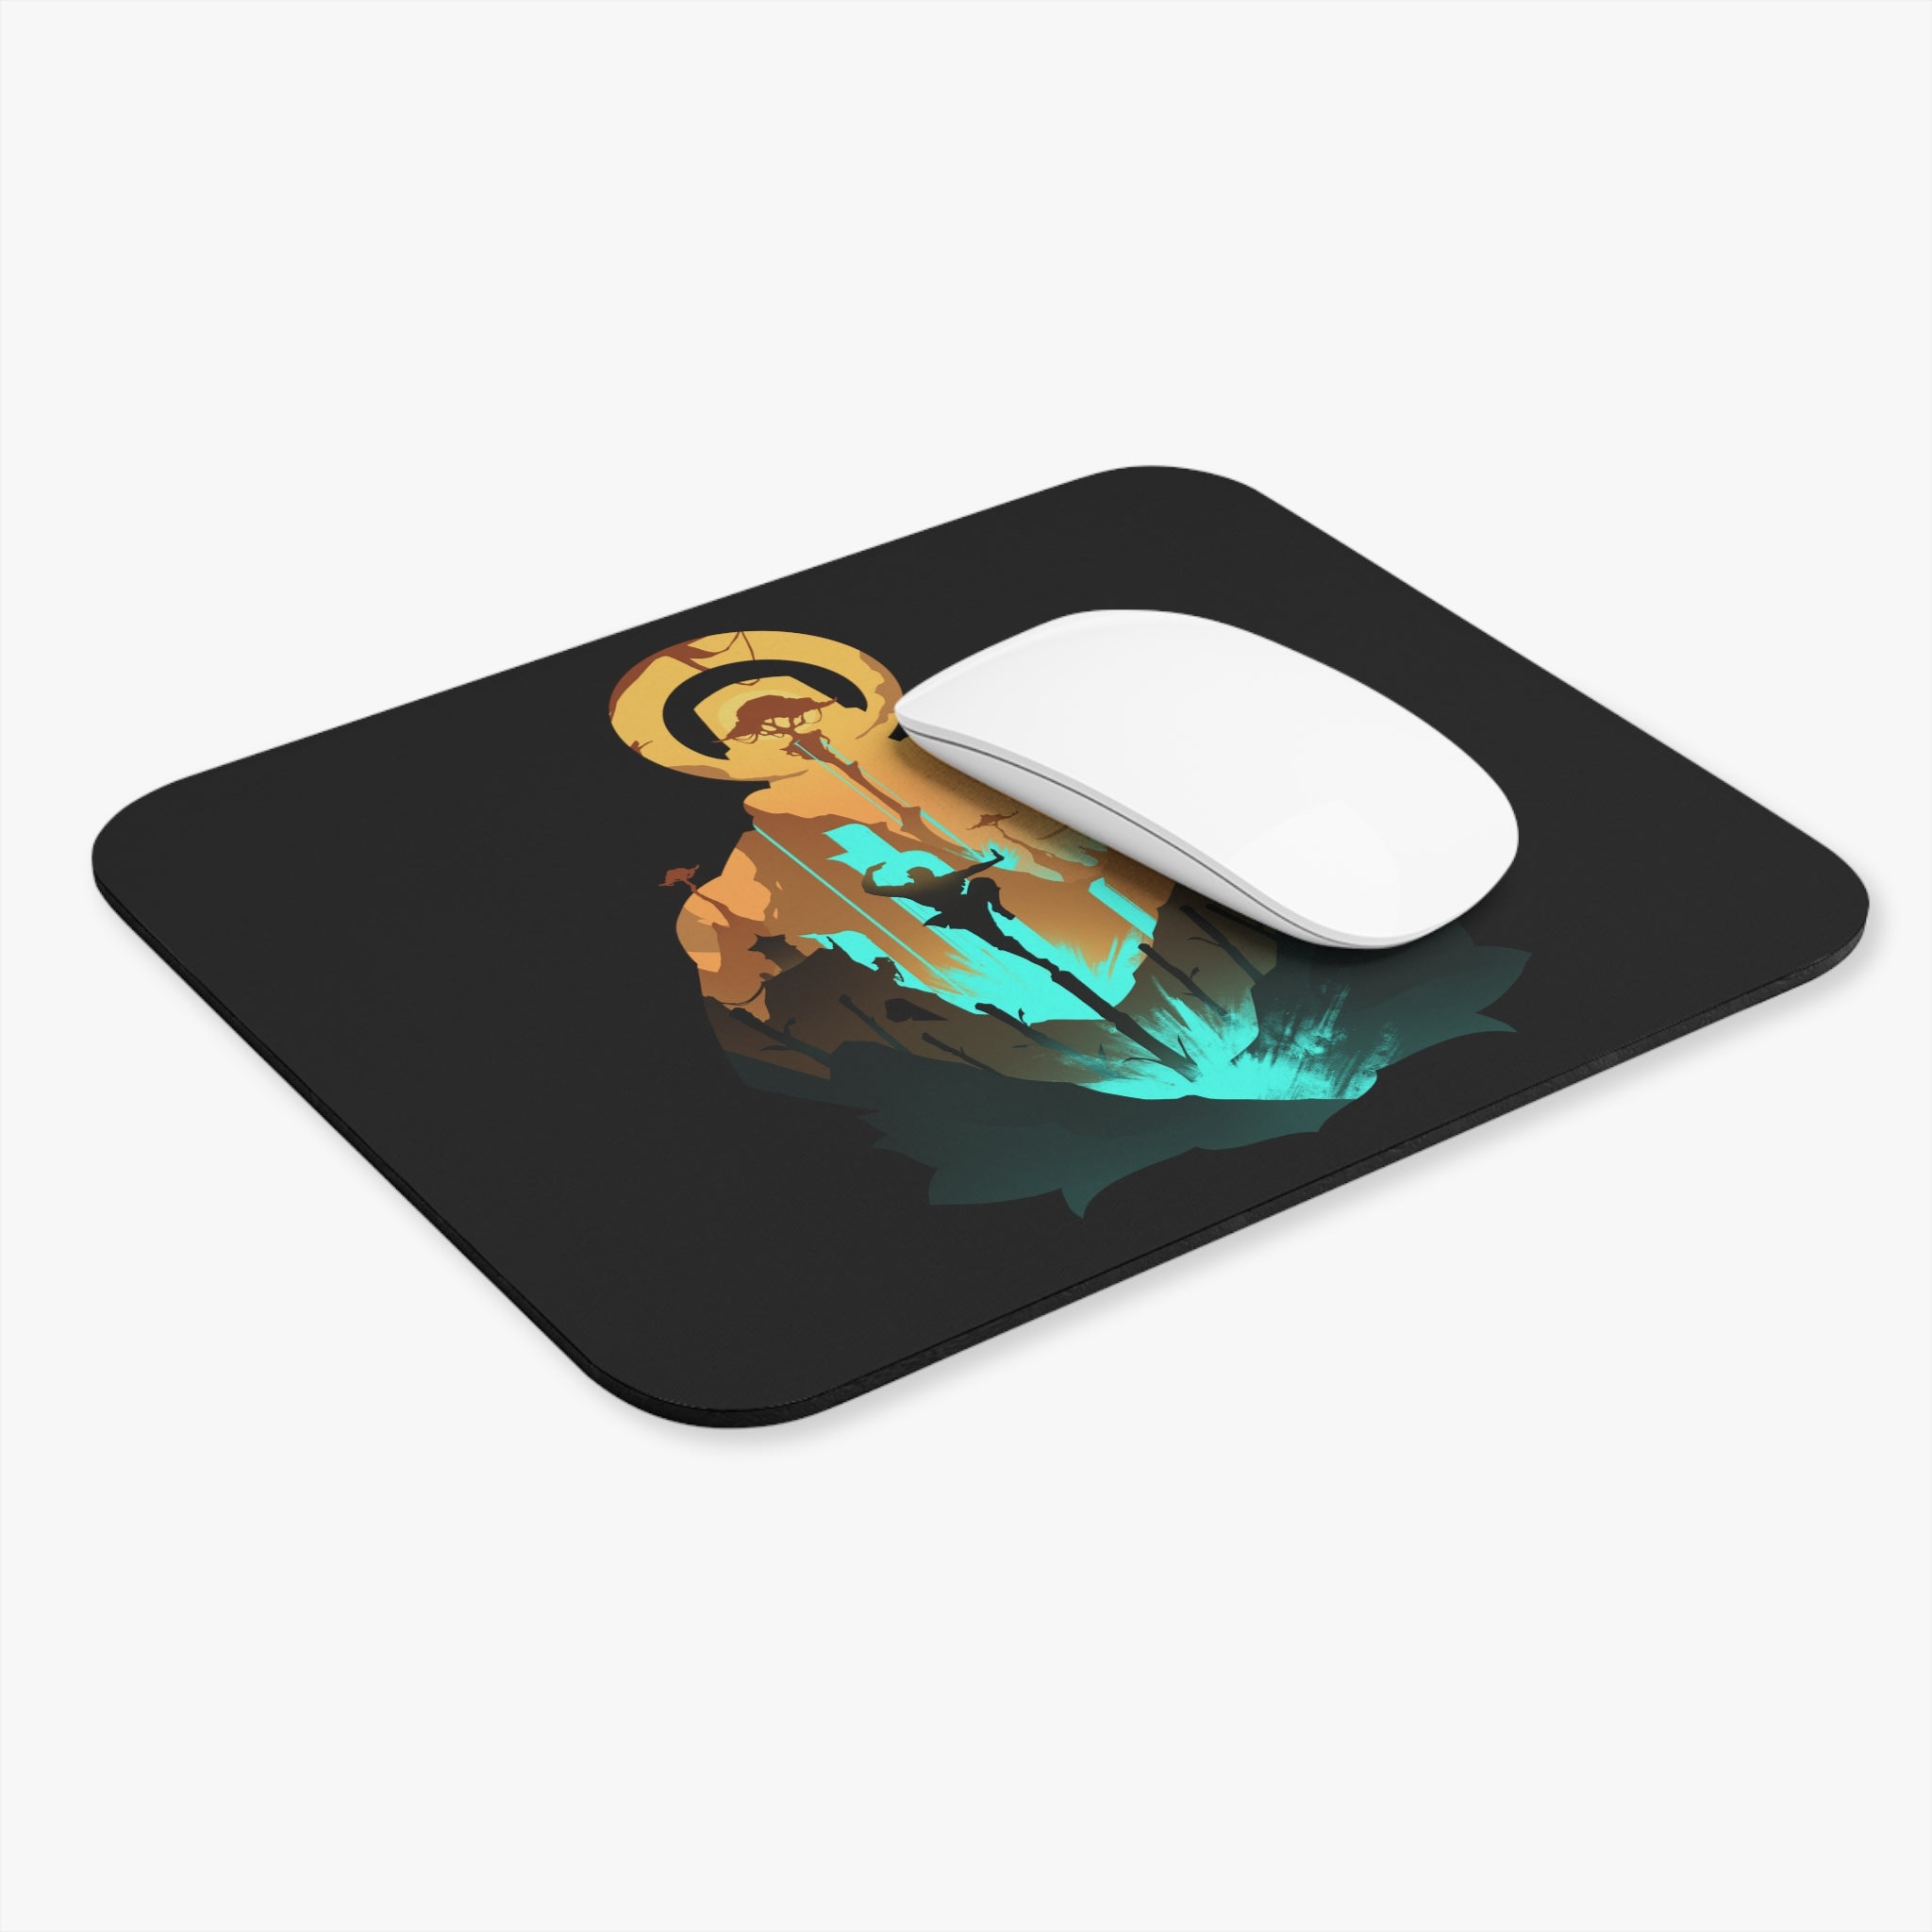 MONK CLASS SILHOUETTE RECTANGLER MOUSE PAD